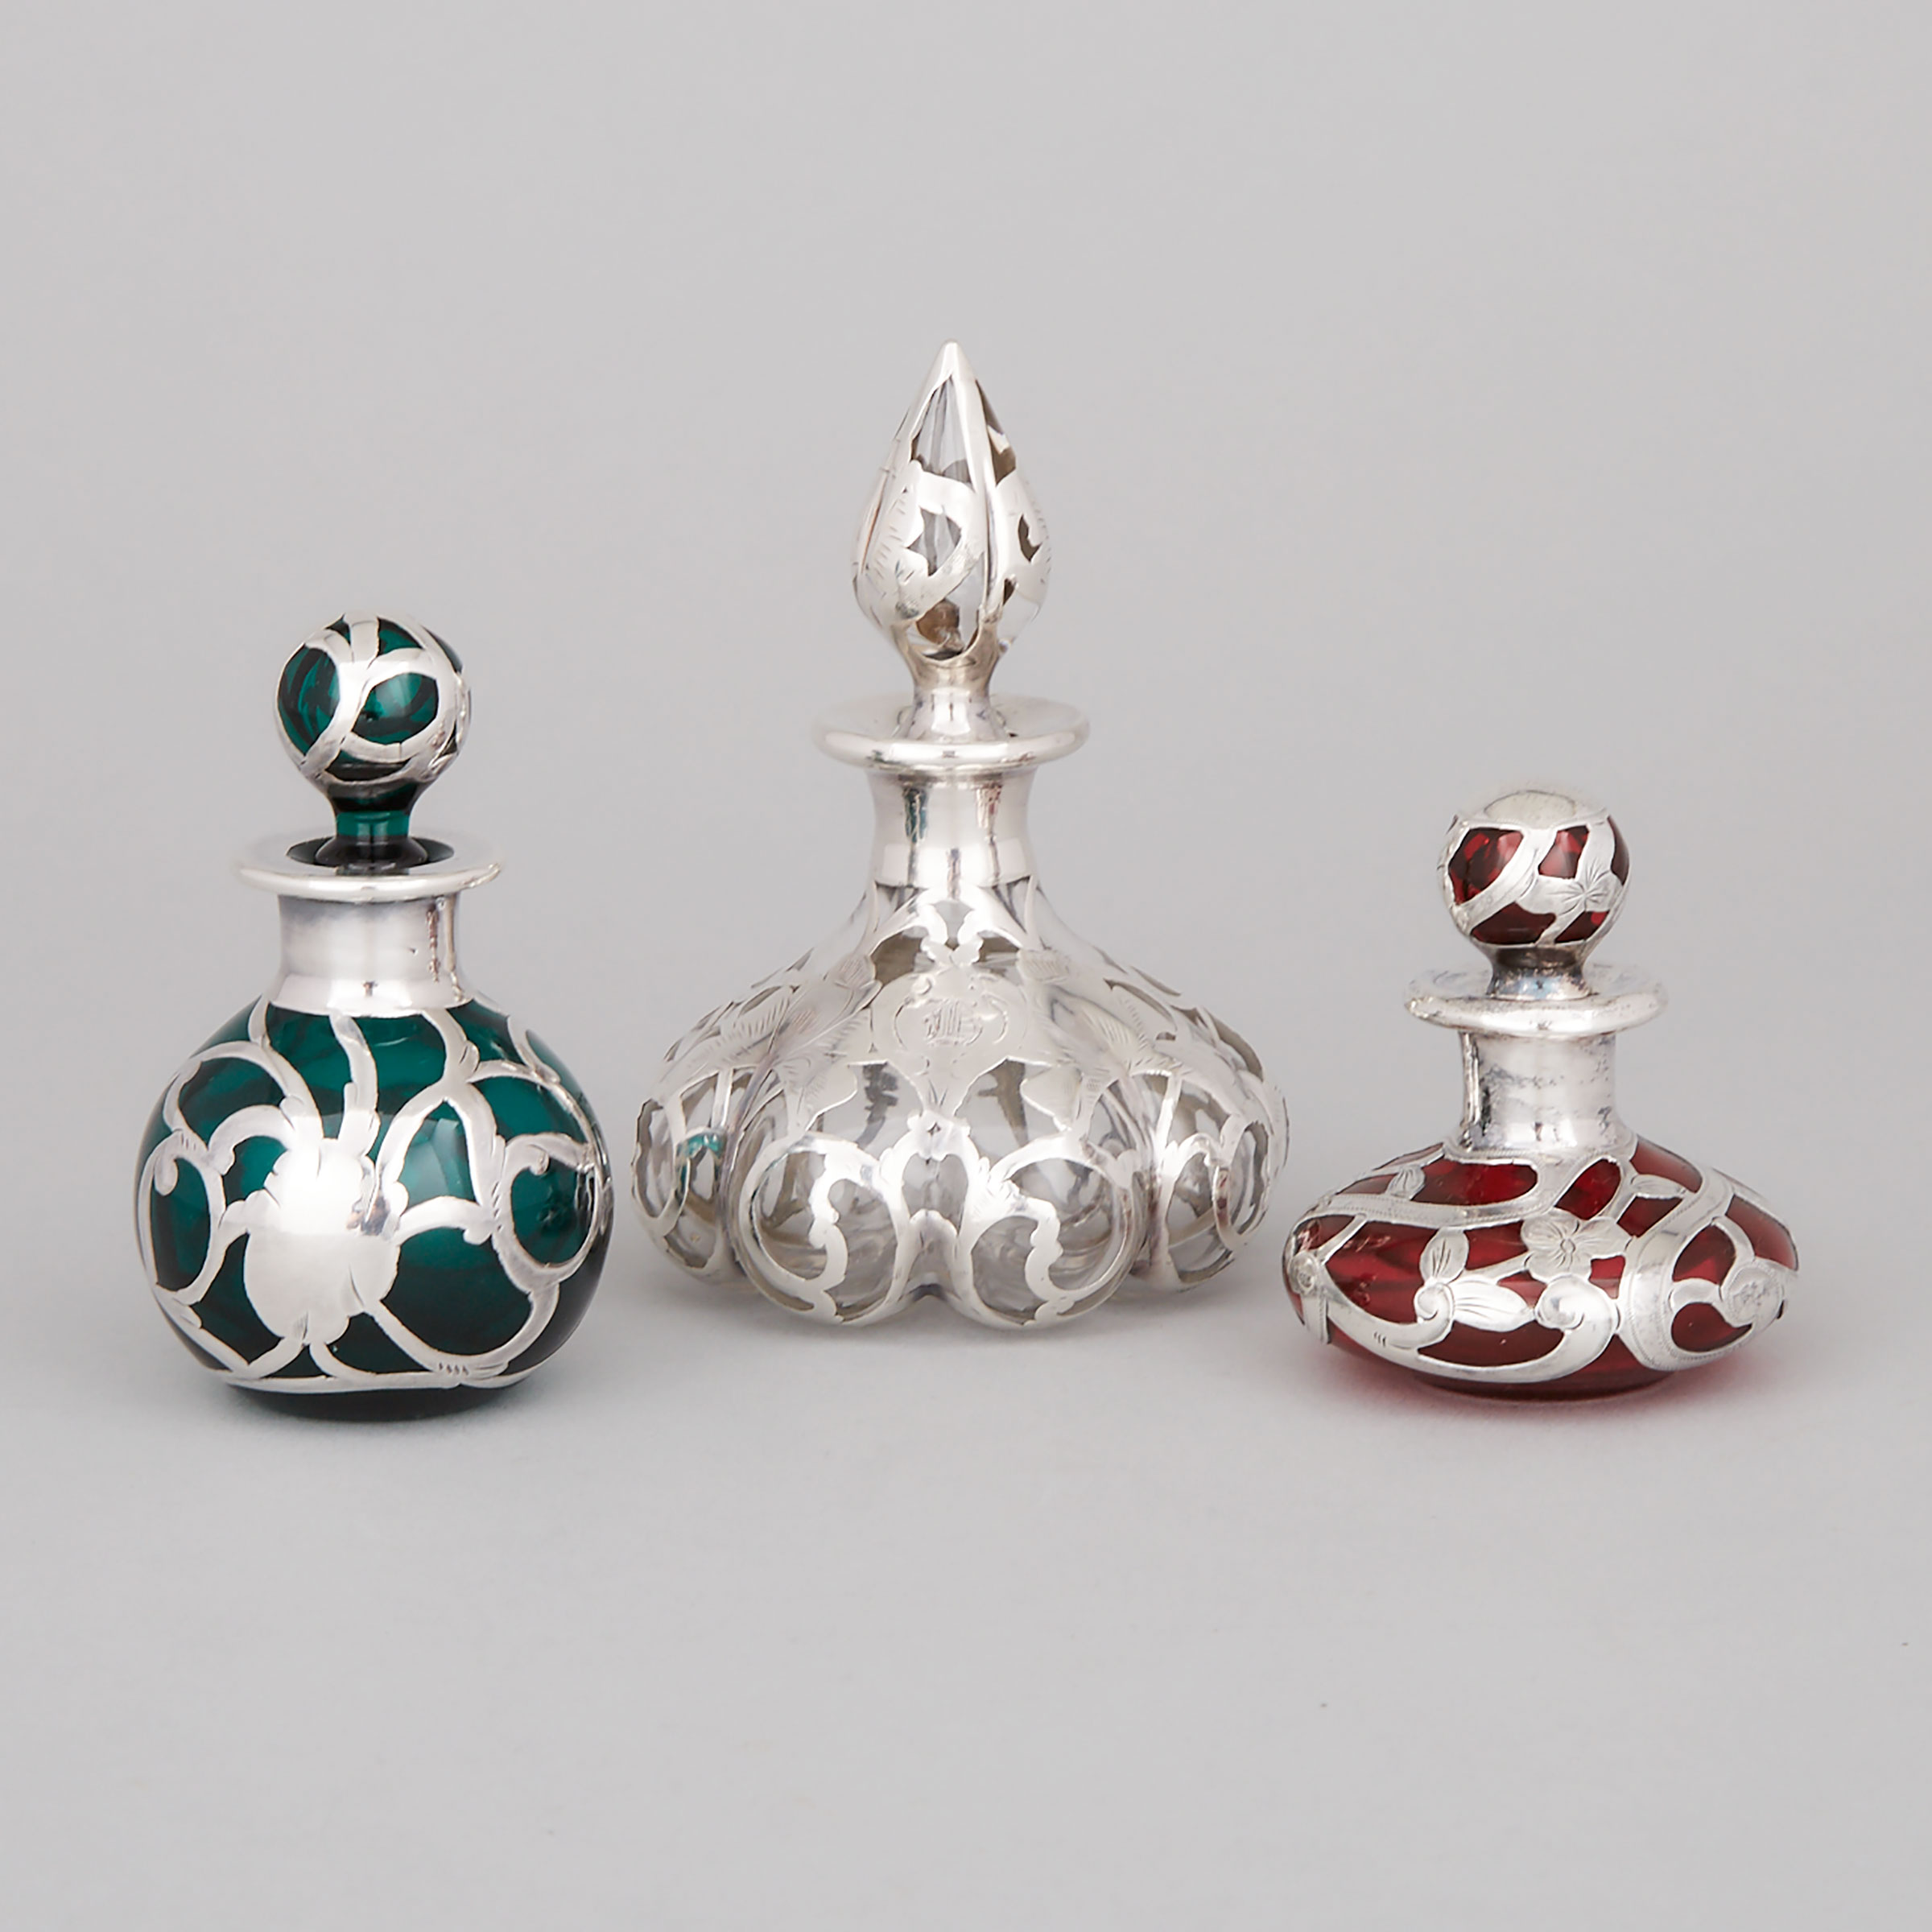 Three American Silver Overlaid Glass Perfume Bottles, early 20th century